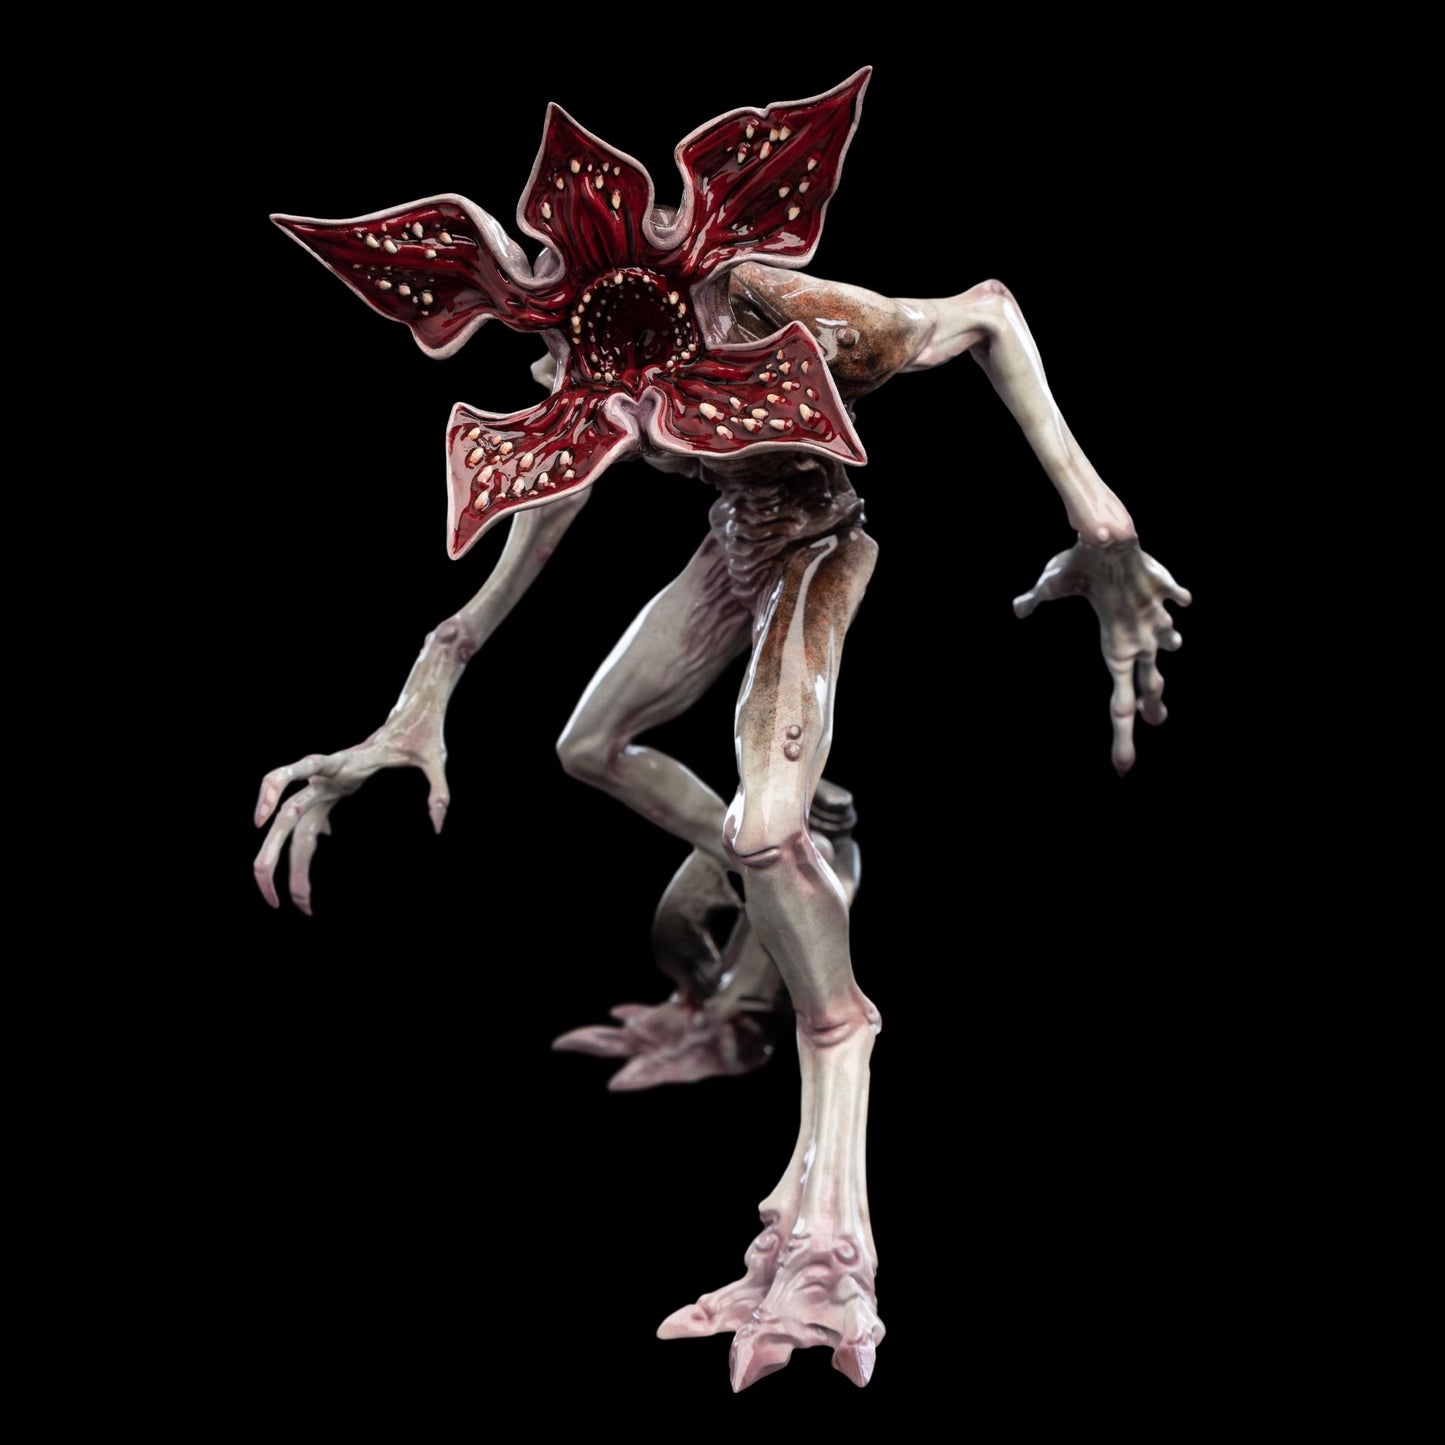 Wounded Demogorgon (Stranger Things) Limited Edition Mini Epics Statue by Weta Workshop